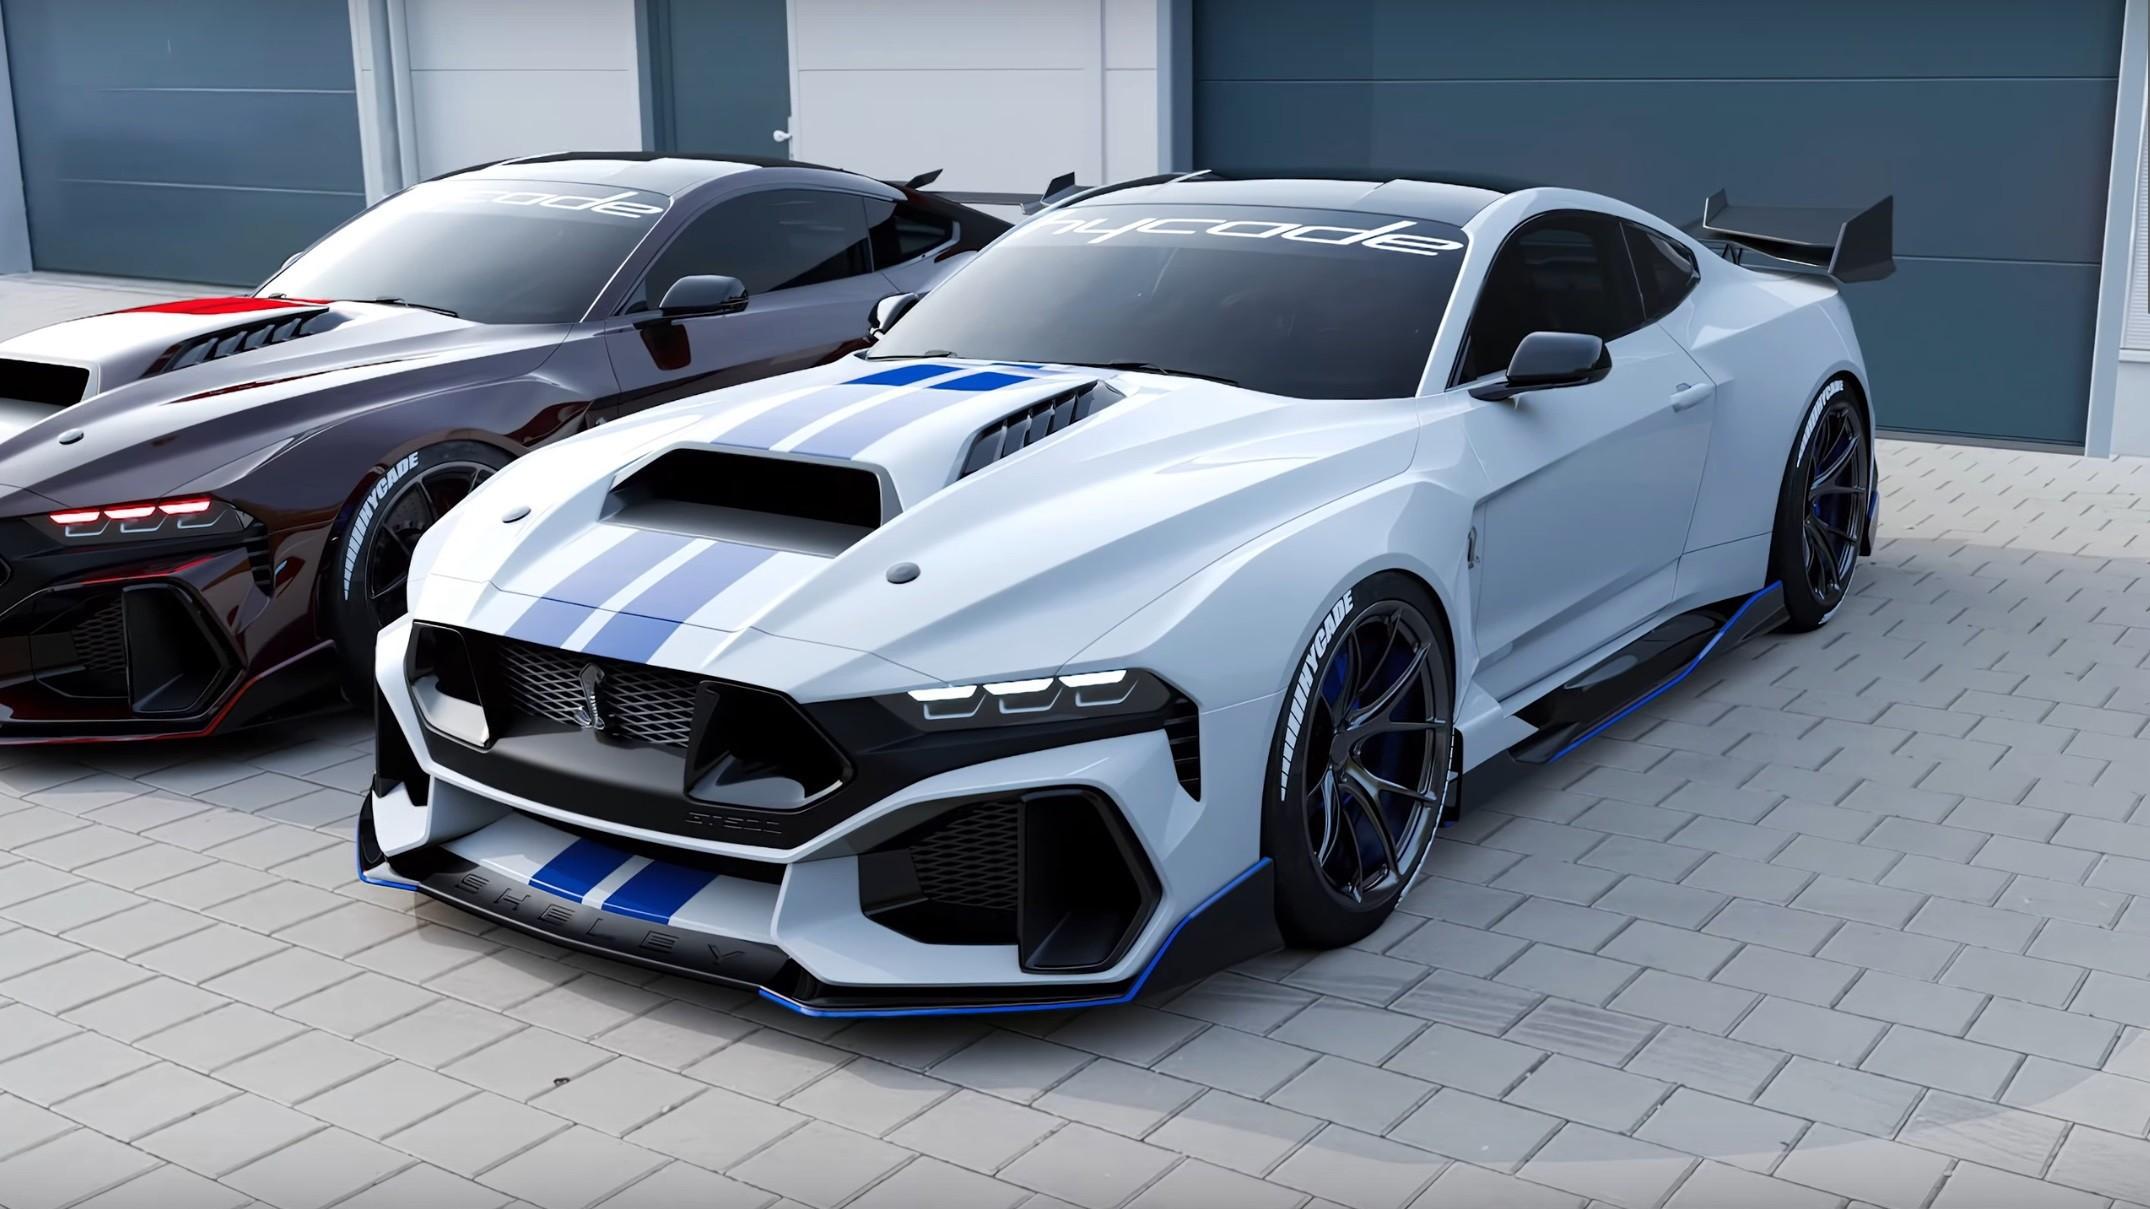 Ford Mustang Shelby Gt500 Imagined Doesn T Give A Flying